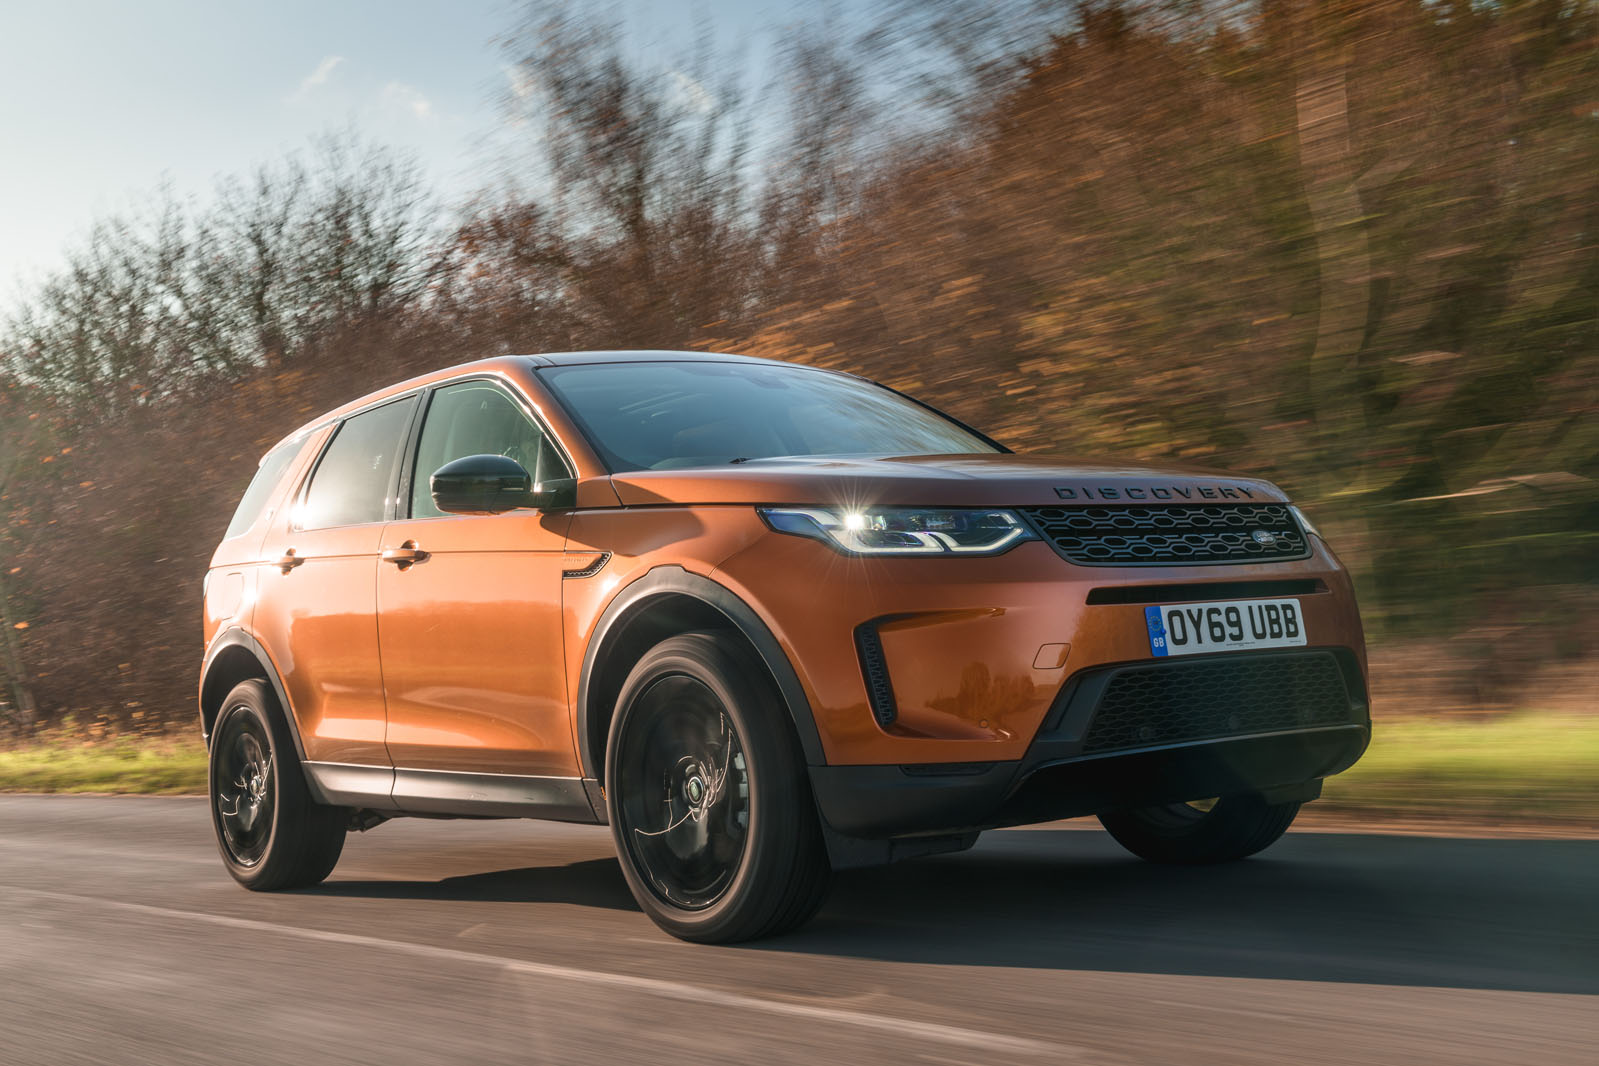 2020 Land Rover Discovery Sport review: Not much more than a